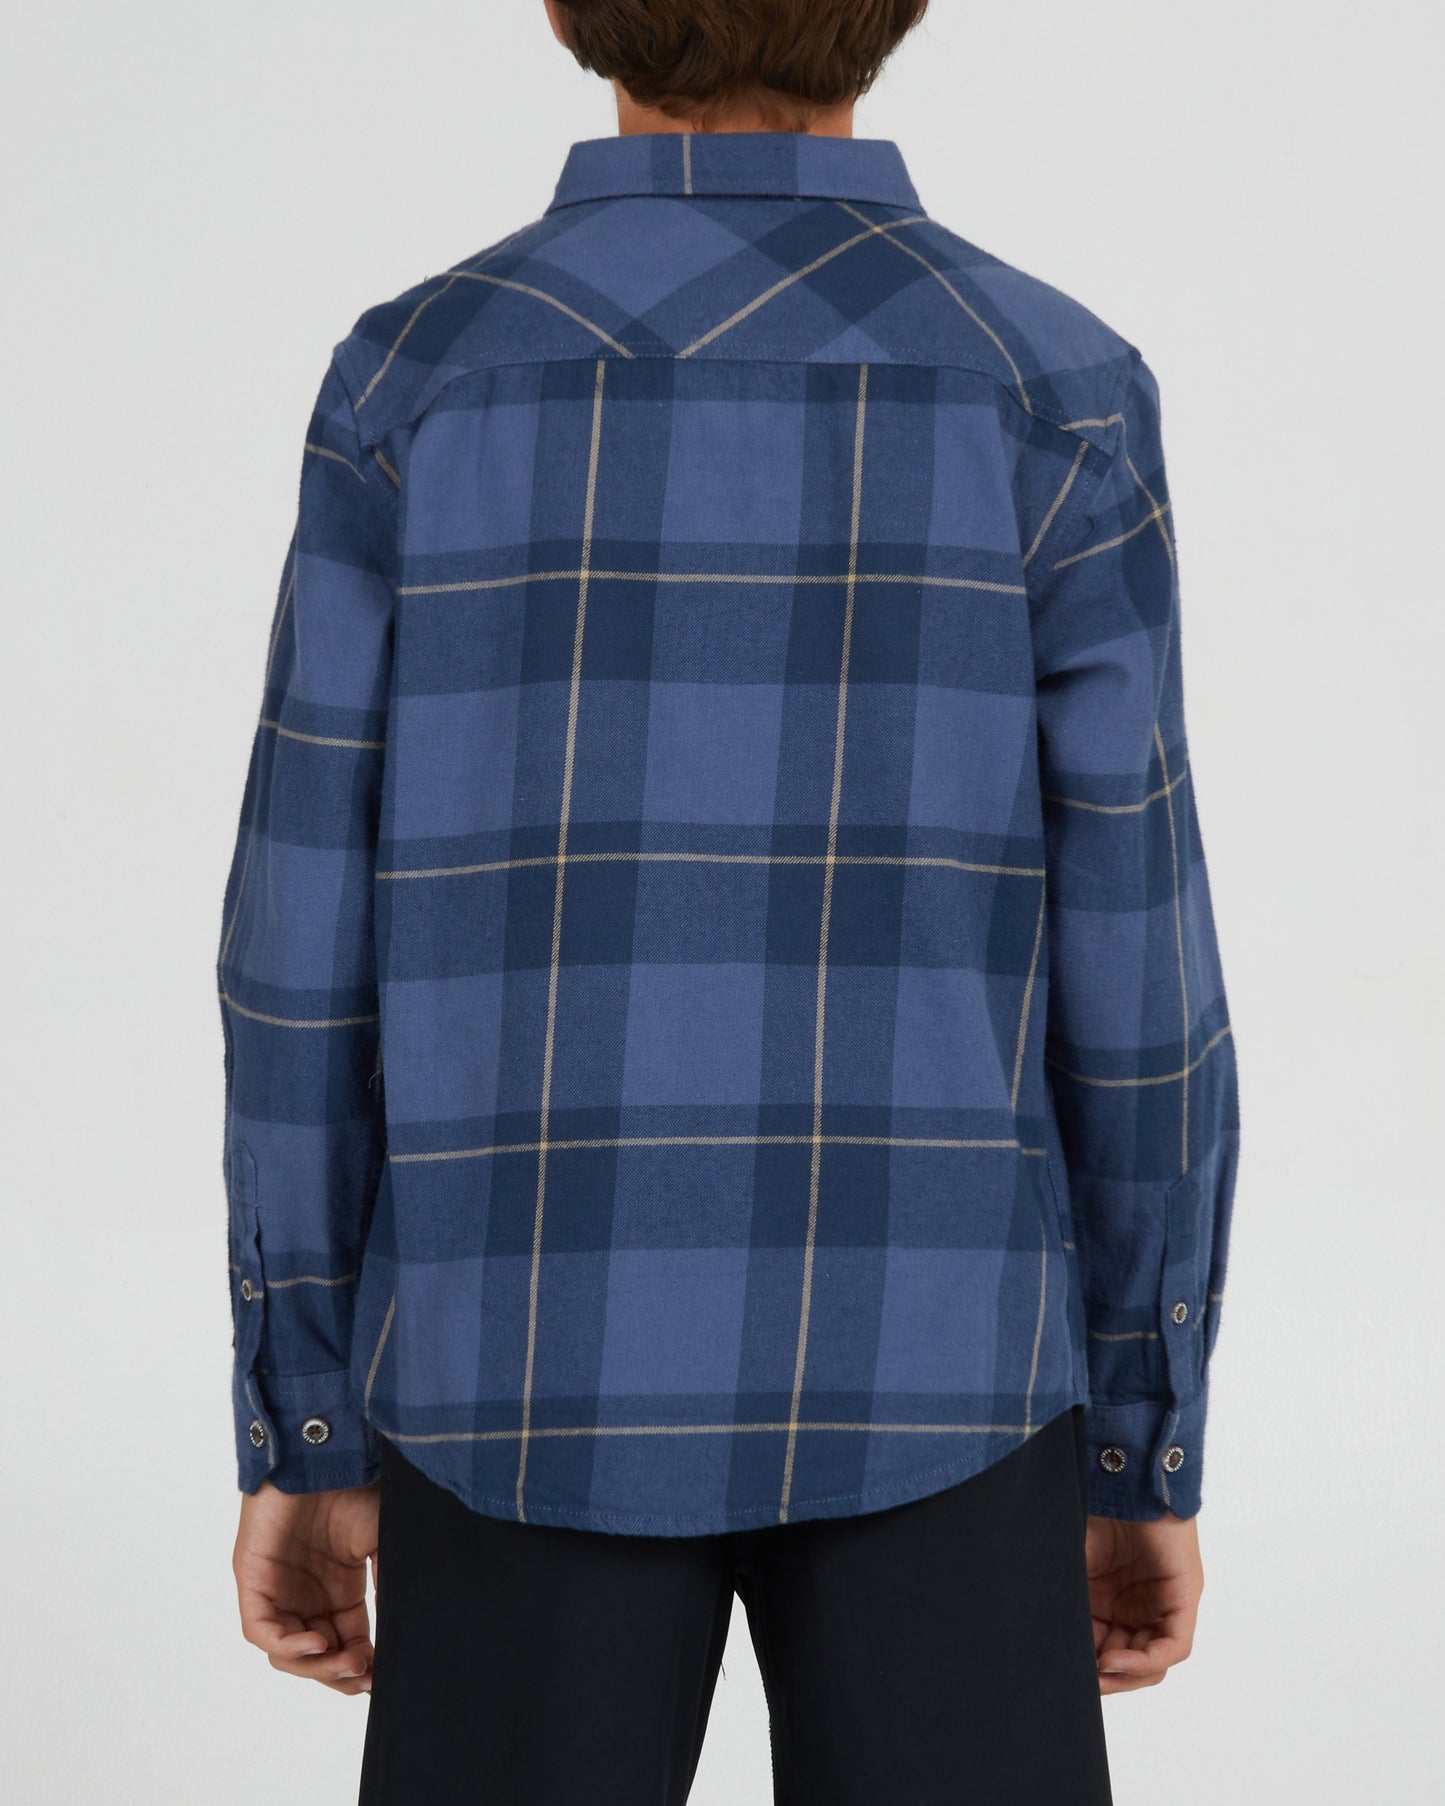 On body back of the First Light Boys Navy Blue L/S Flannel